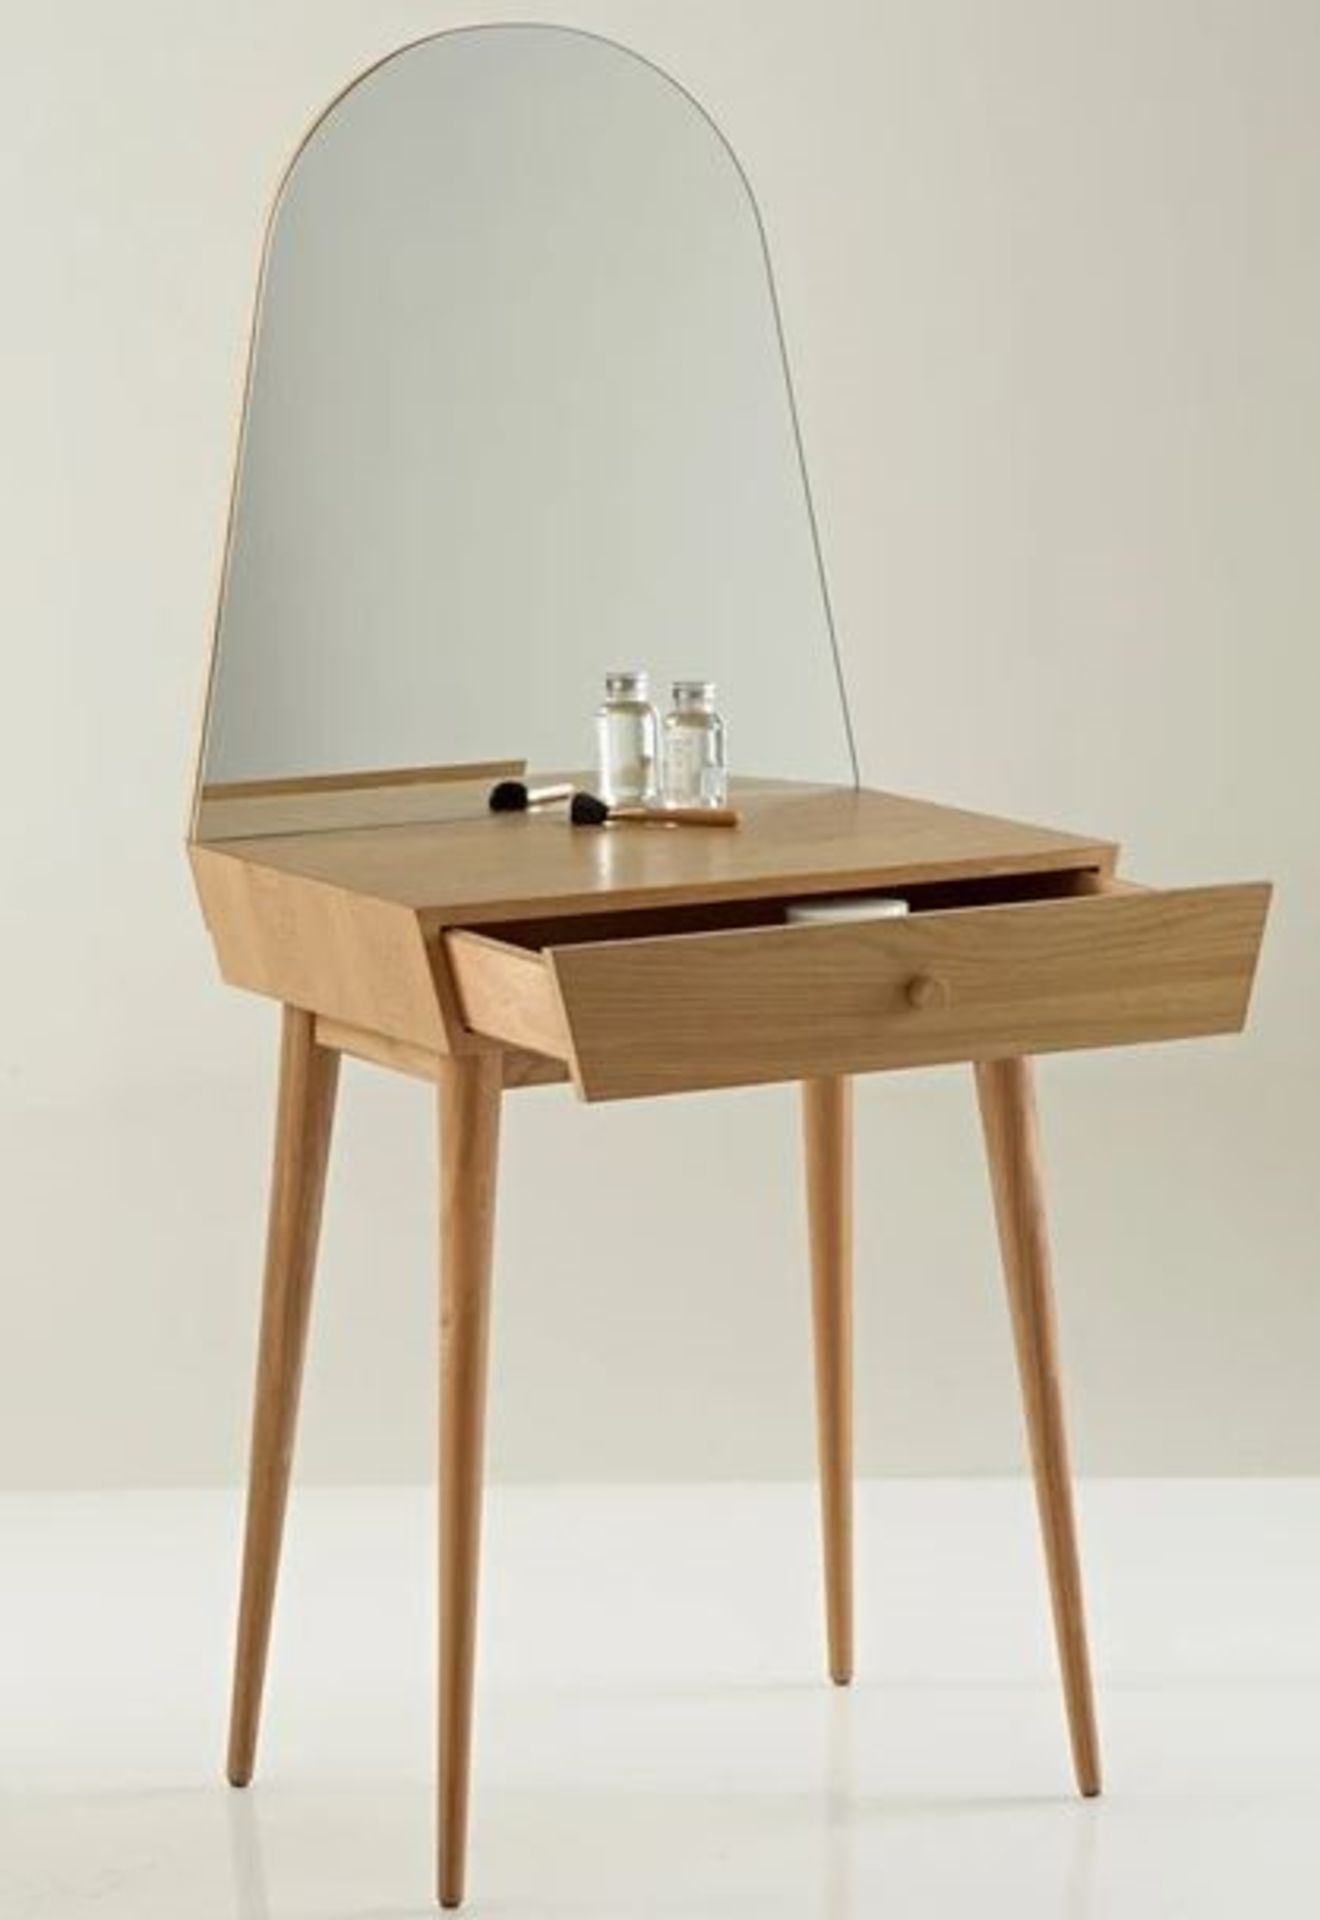 LA REDOUTE CLAIROY 1 DRAWER SCANDI-STYLE DRESSING TABLE